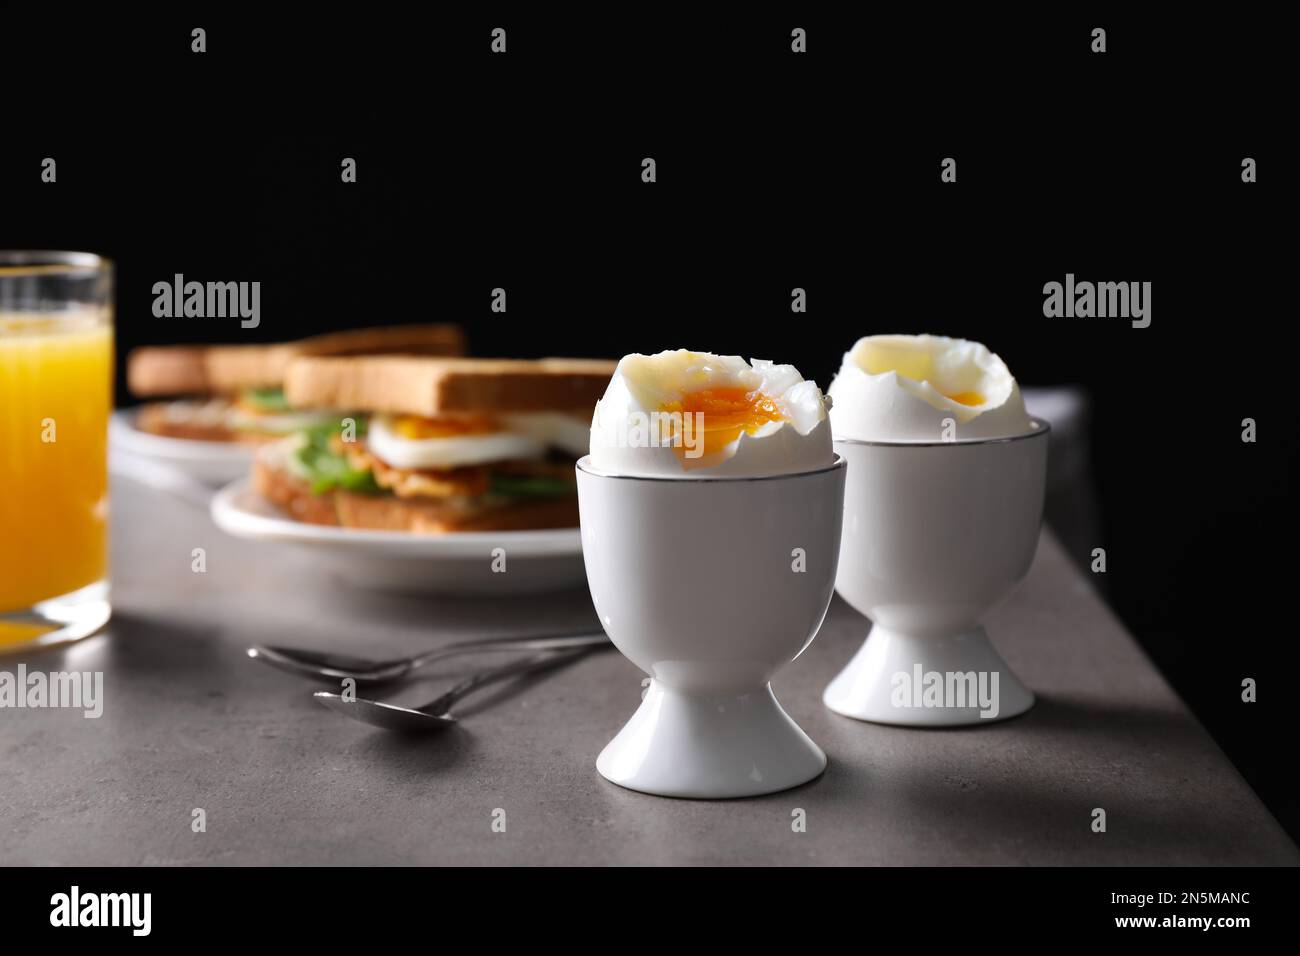 https://c8.alamy.com/comp/2N5MANC/soft-boiled-eggs-served-on-grey-table-space-for-text-2N5MANC.jpg